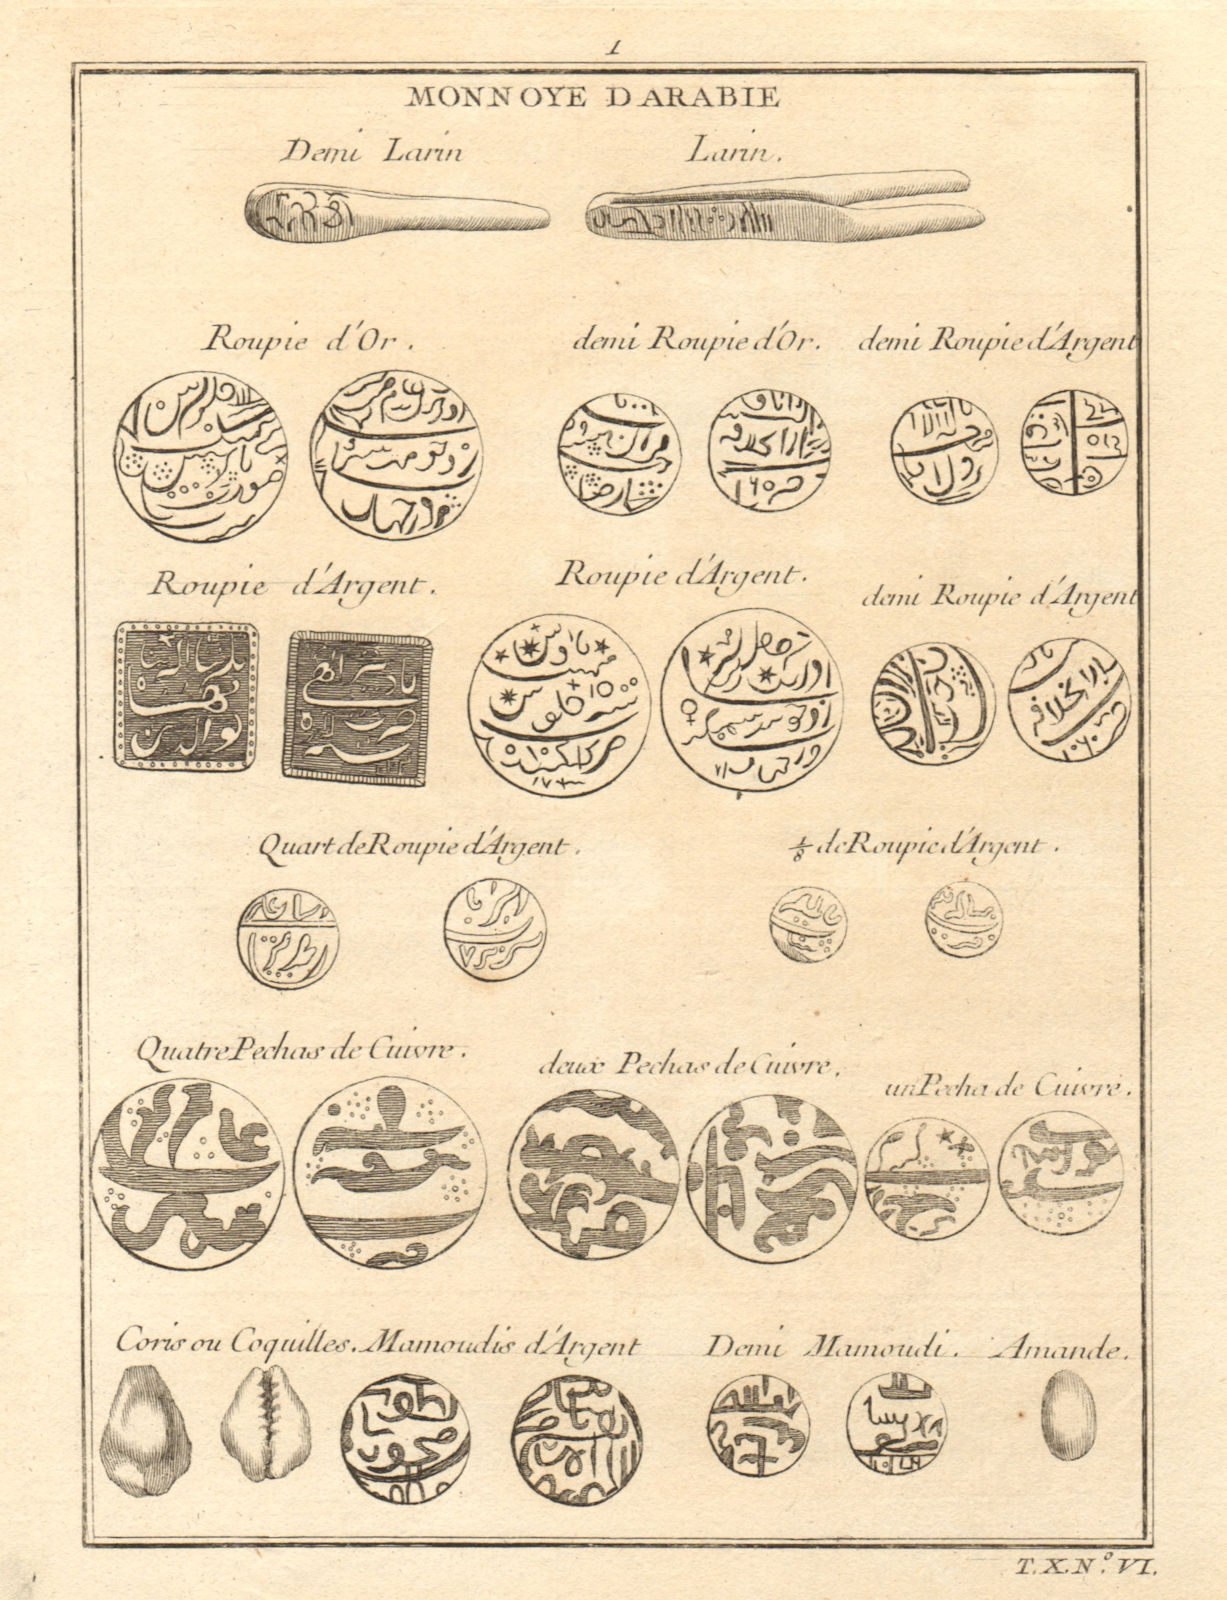 Associate Product 'Monnoye d'Arabie'. Coins of Arabia & the Mughal Empire. Rupees. Cowries 1752